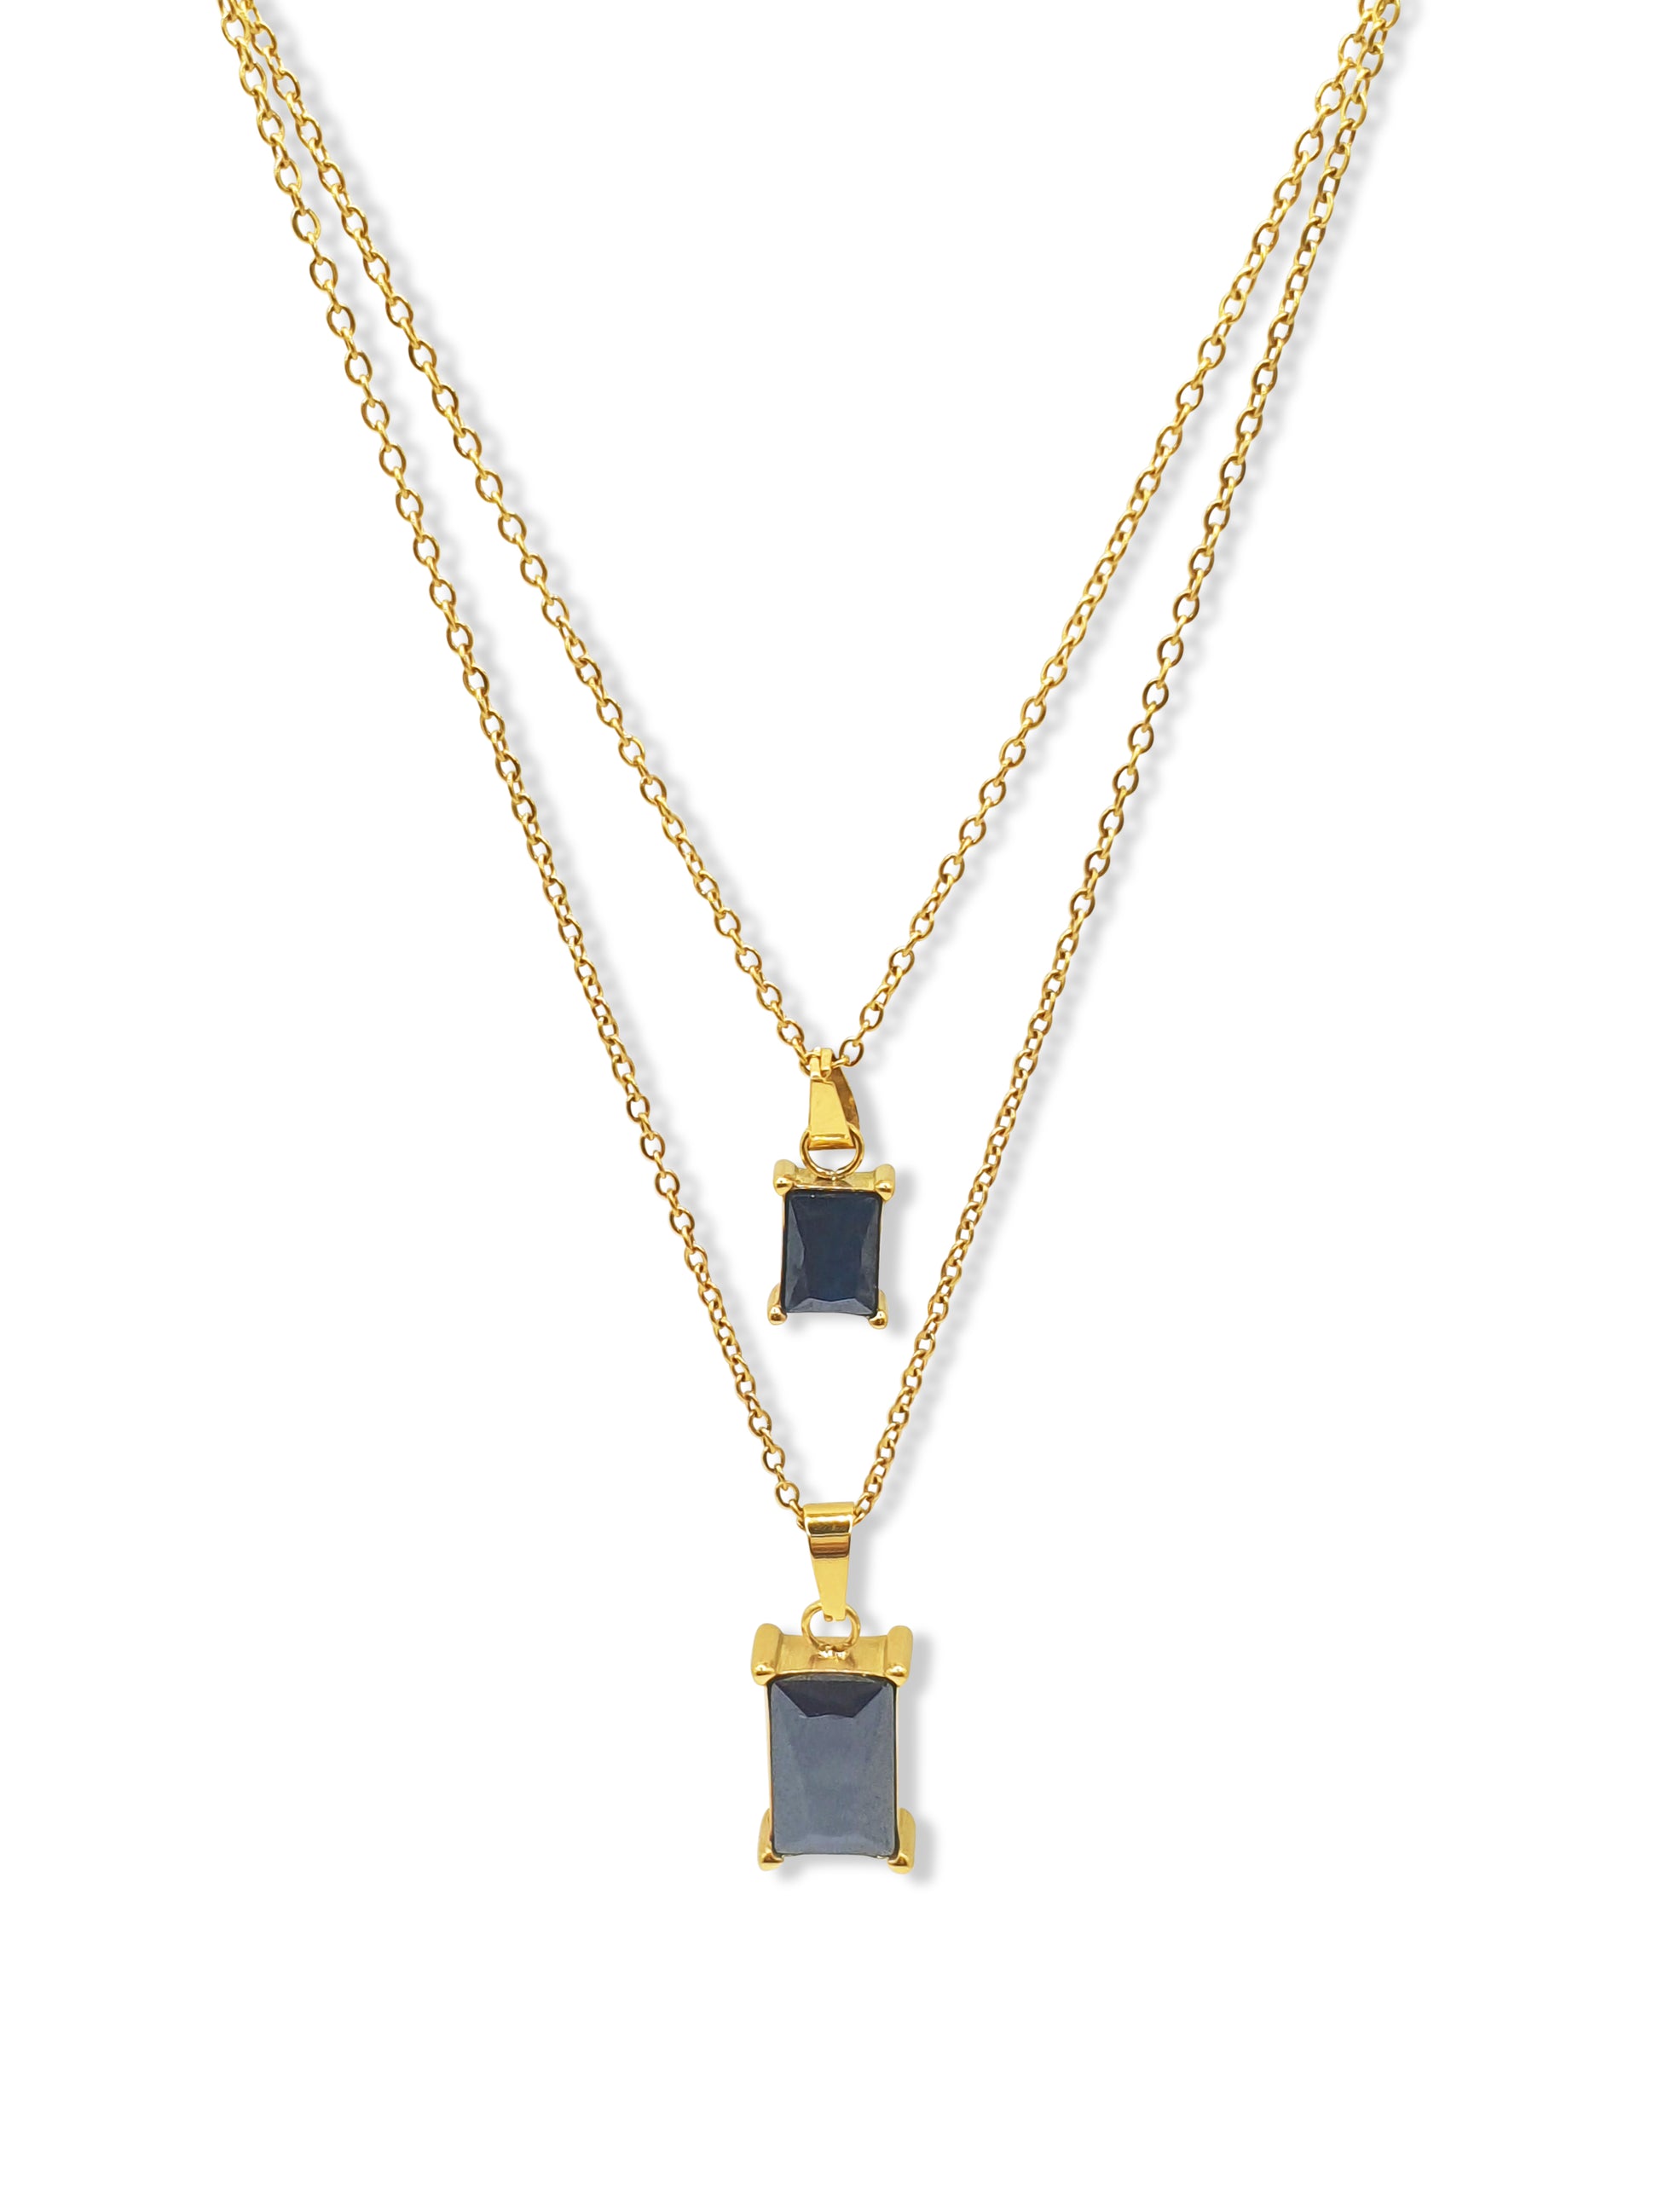 A gold double layered necklace with black rectangle jewel pendants